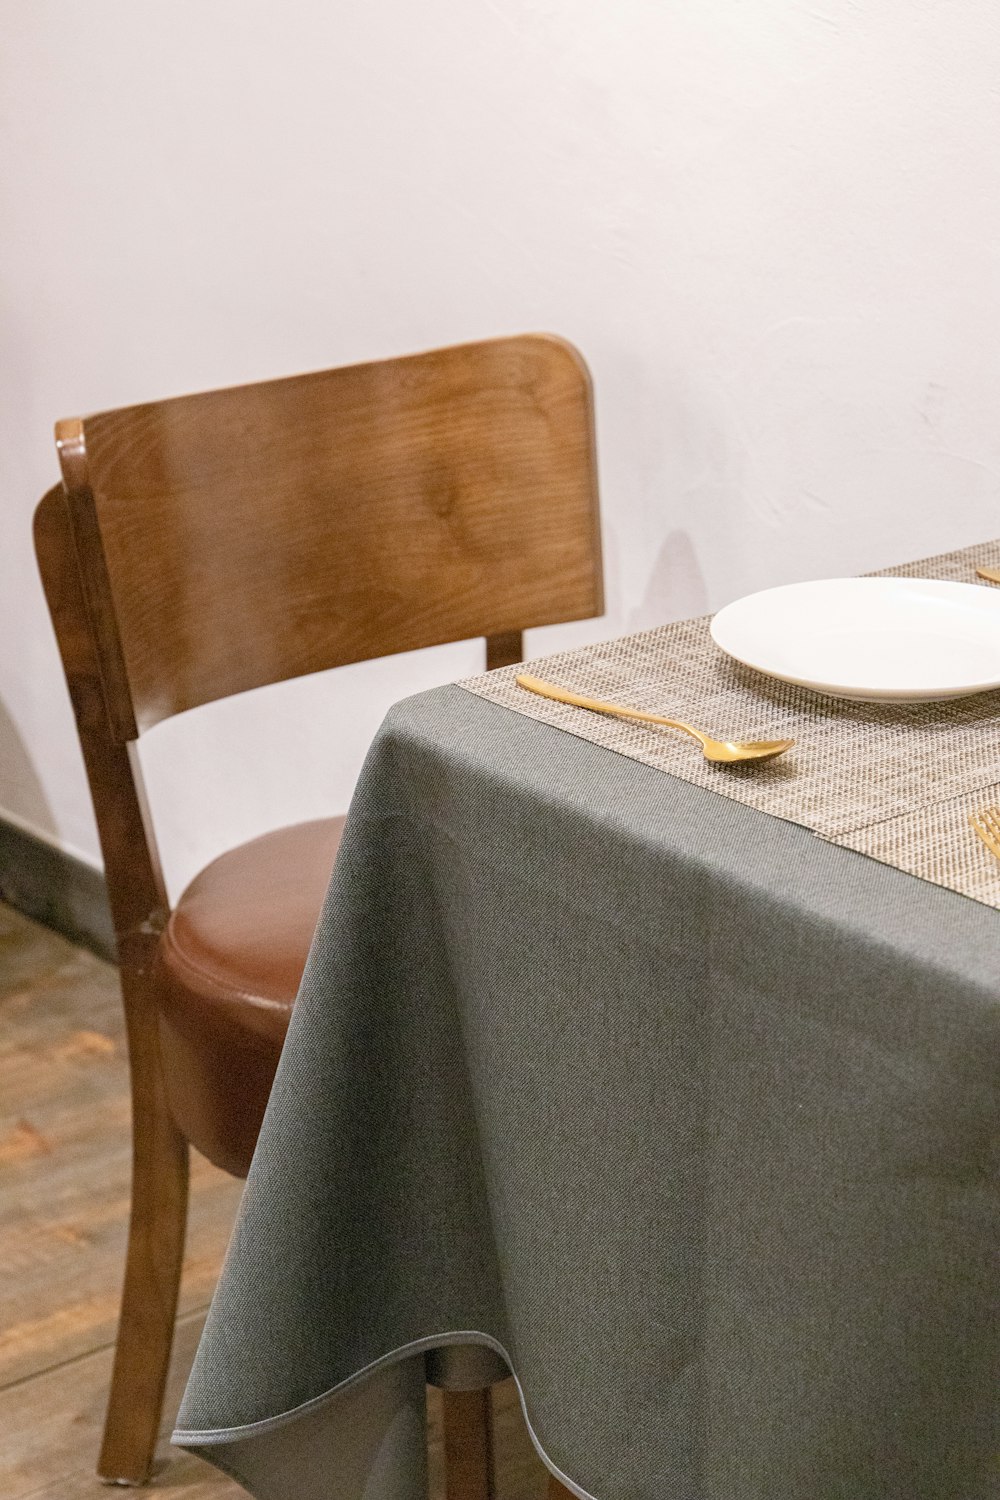 a table with a plate and silverware on it